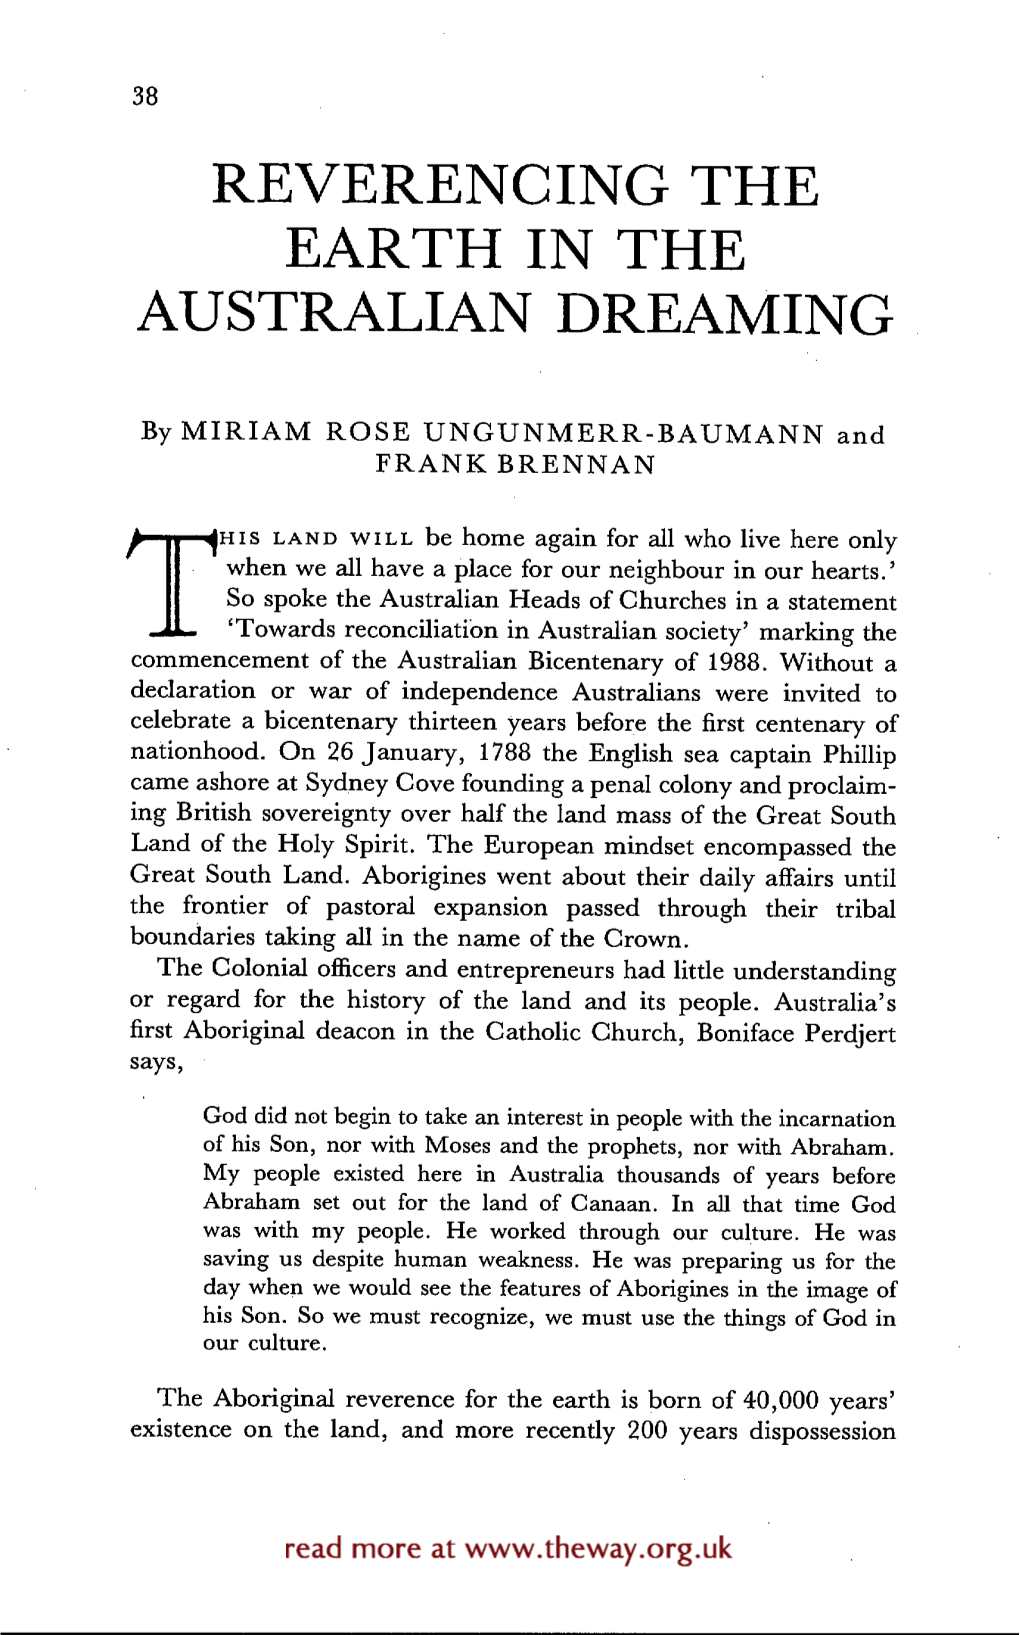 Reverencing the Earth in the Australian Dreaming